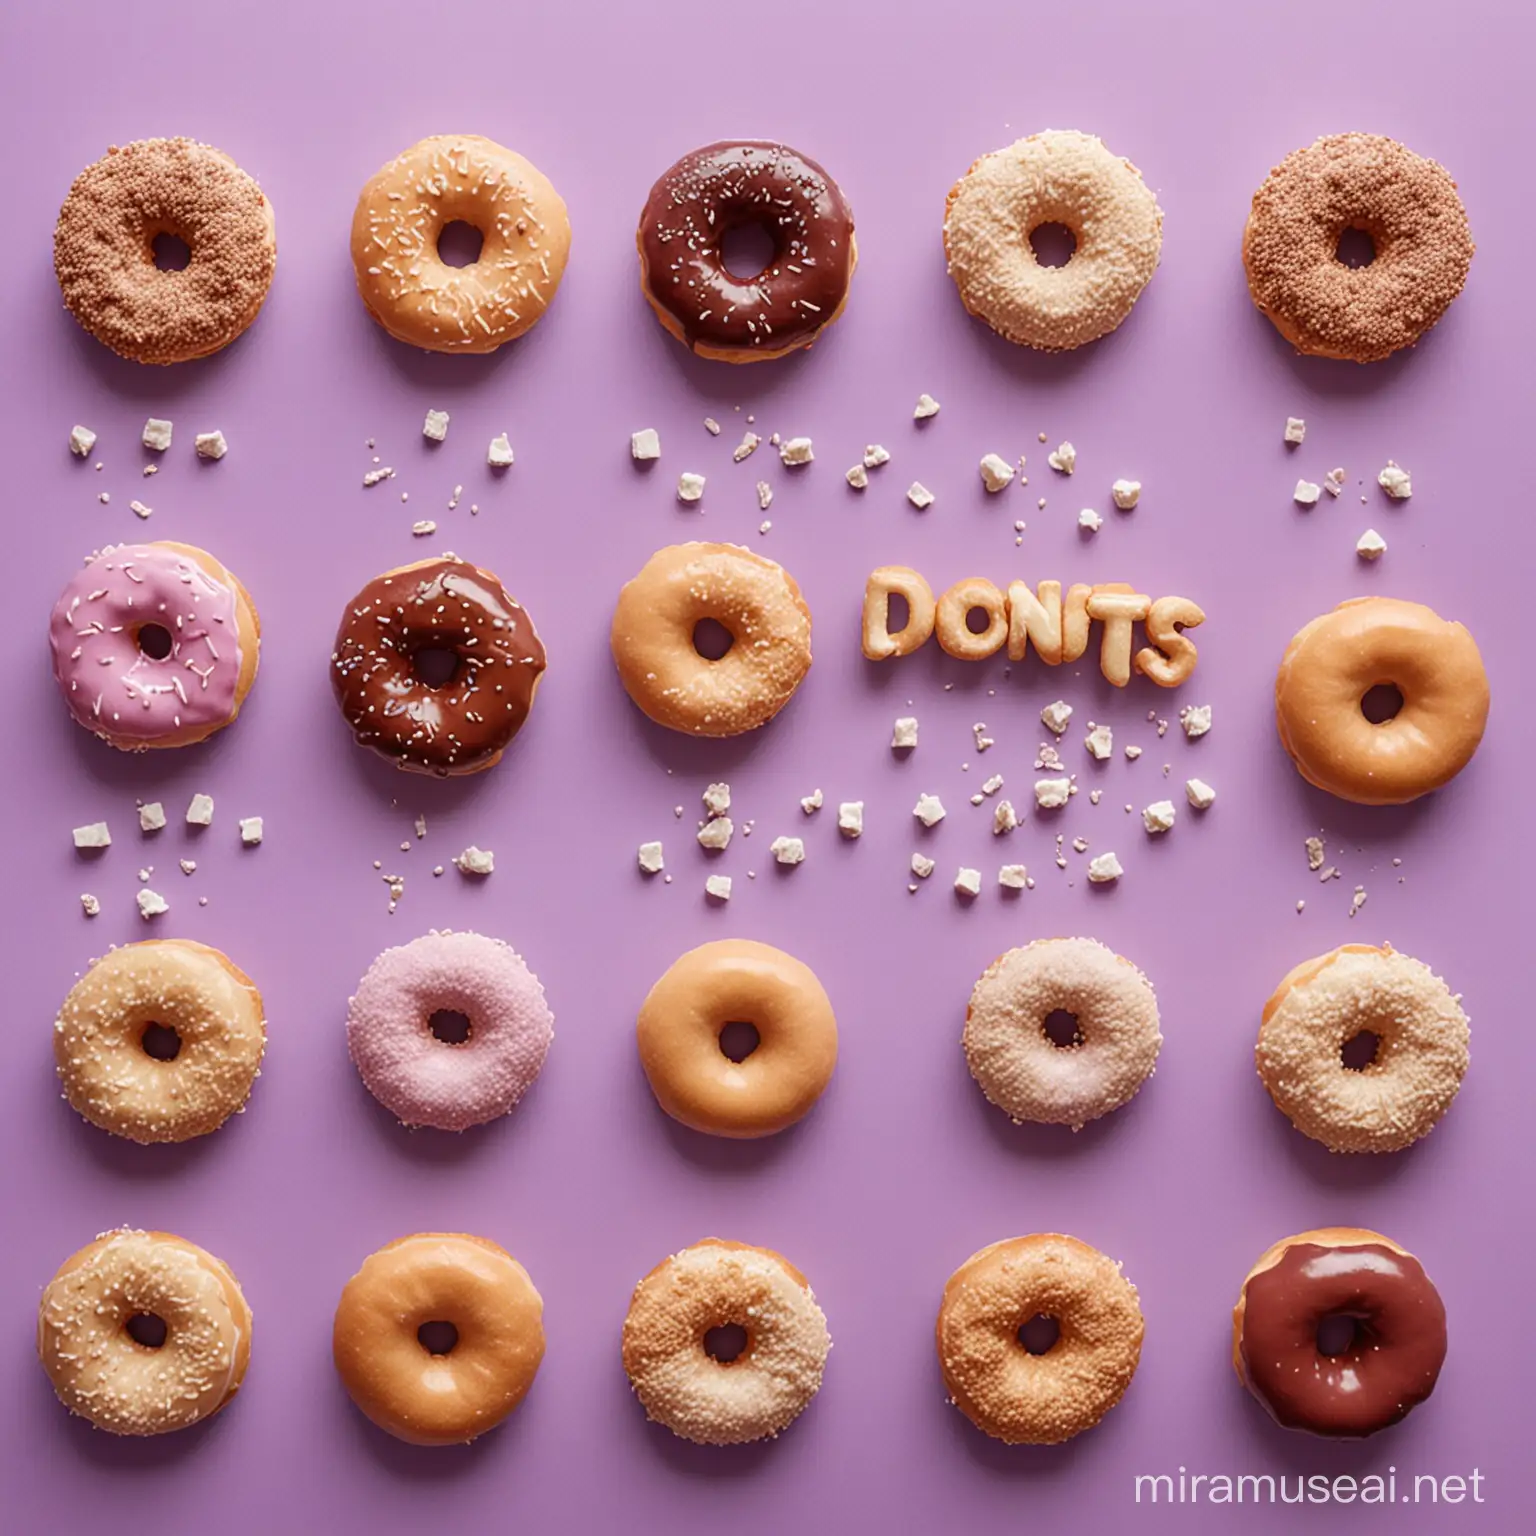 Assorted Ingredients on Light Purple Background Donuts Oats Sugar Cubes Potatoes and More